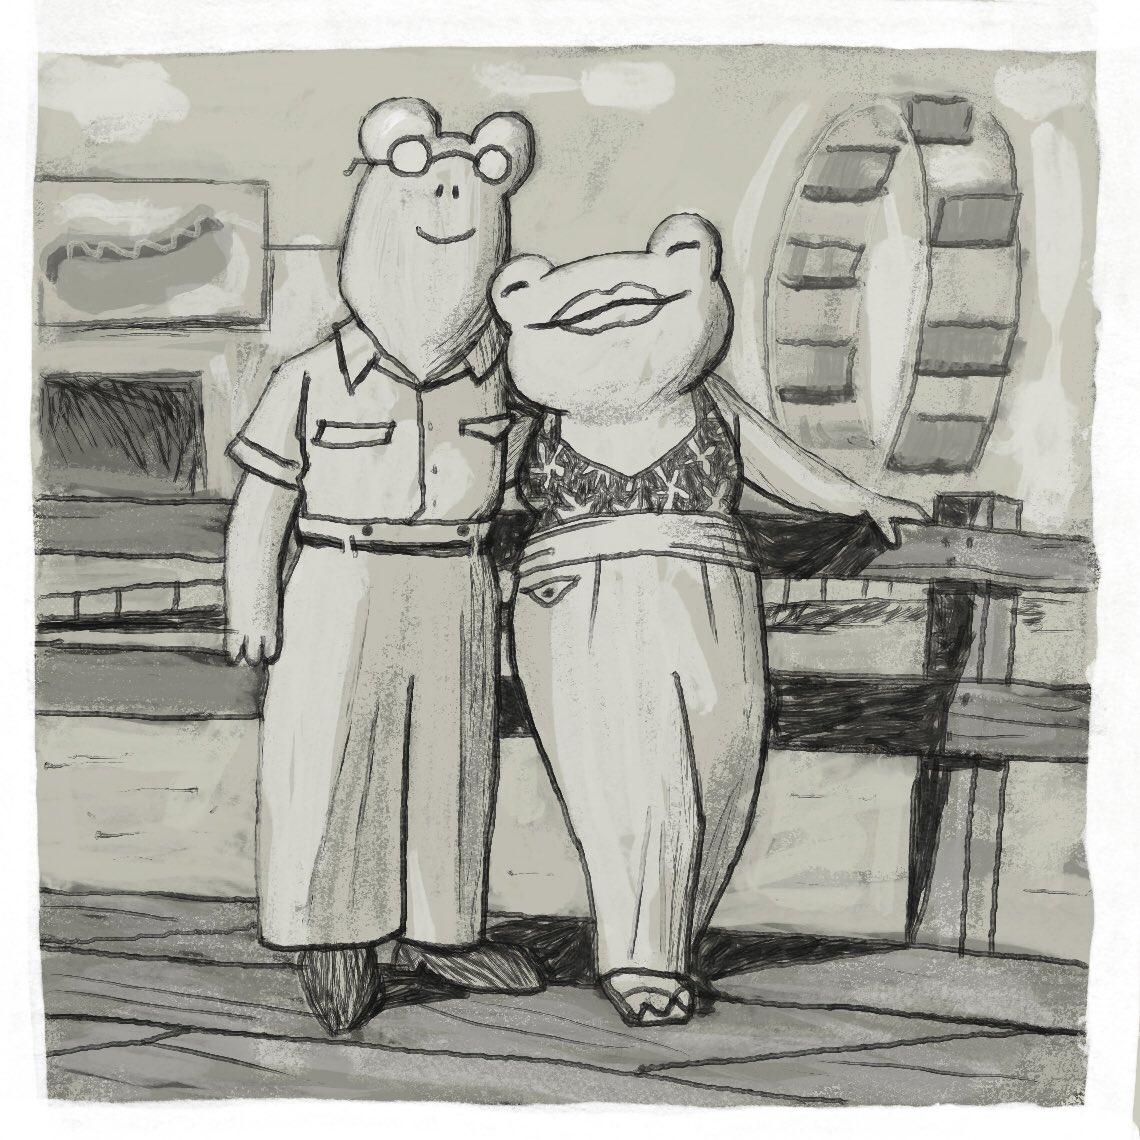 found some old photos of your grandparents at coney island 